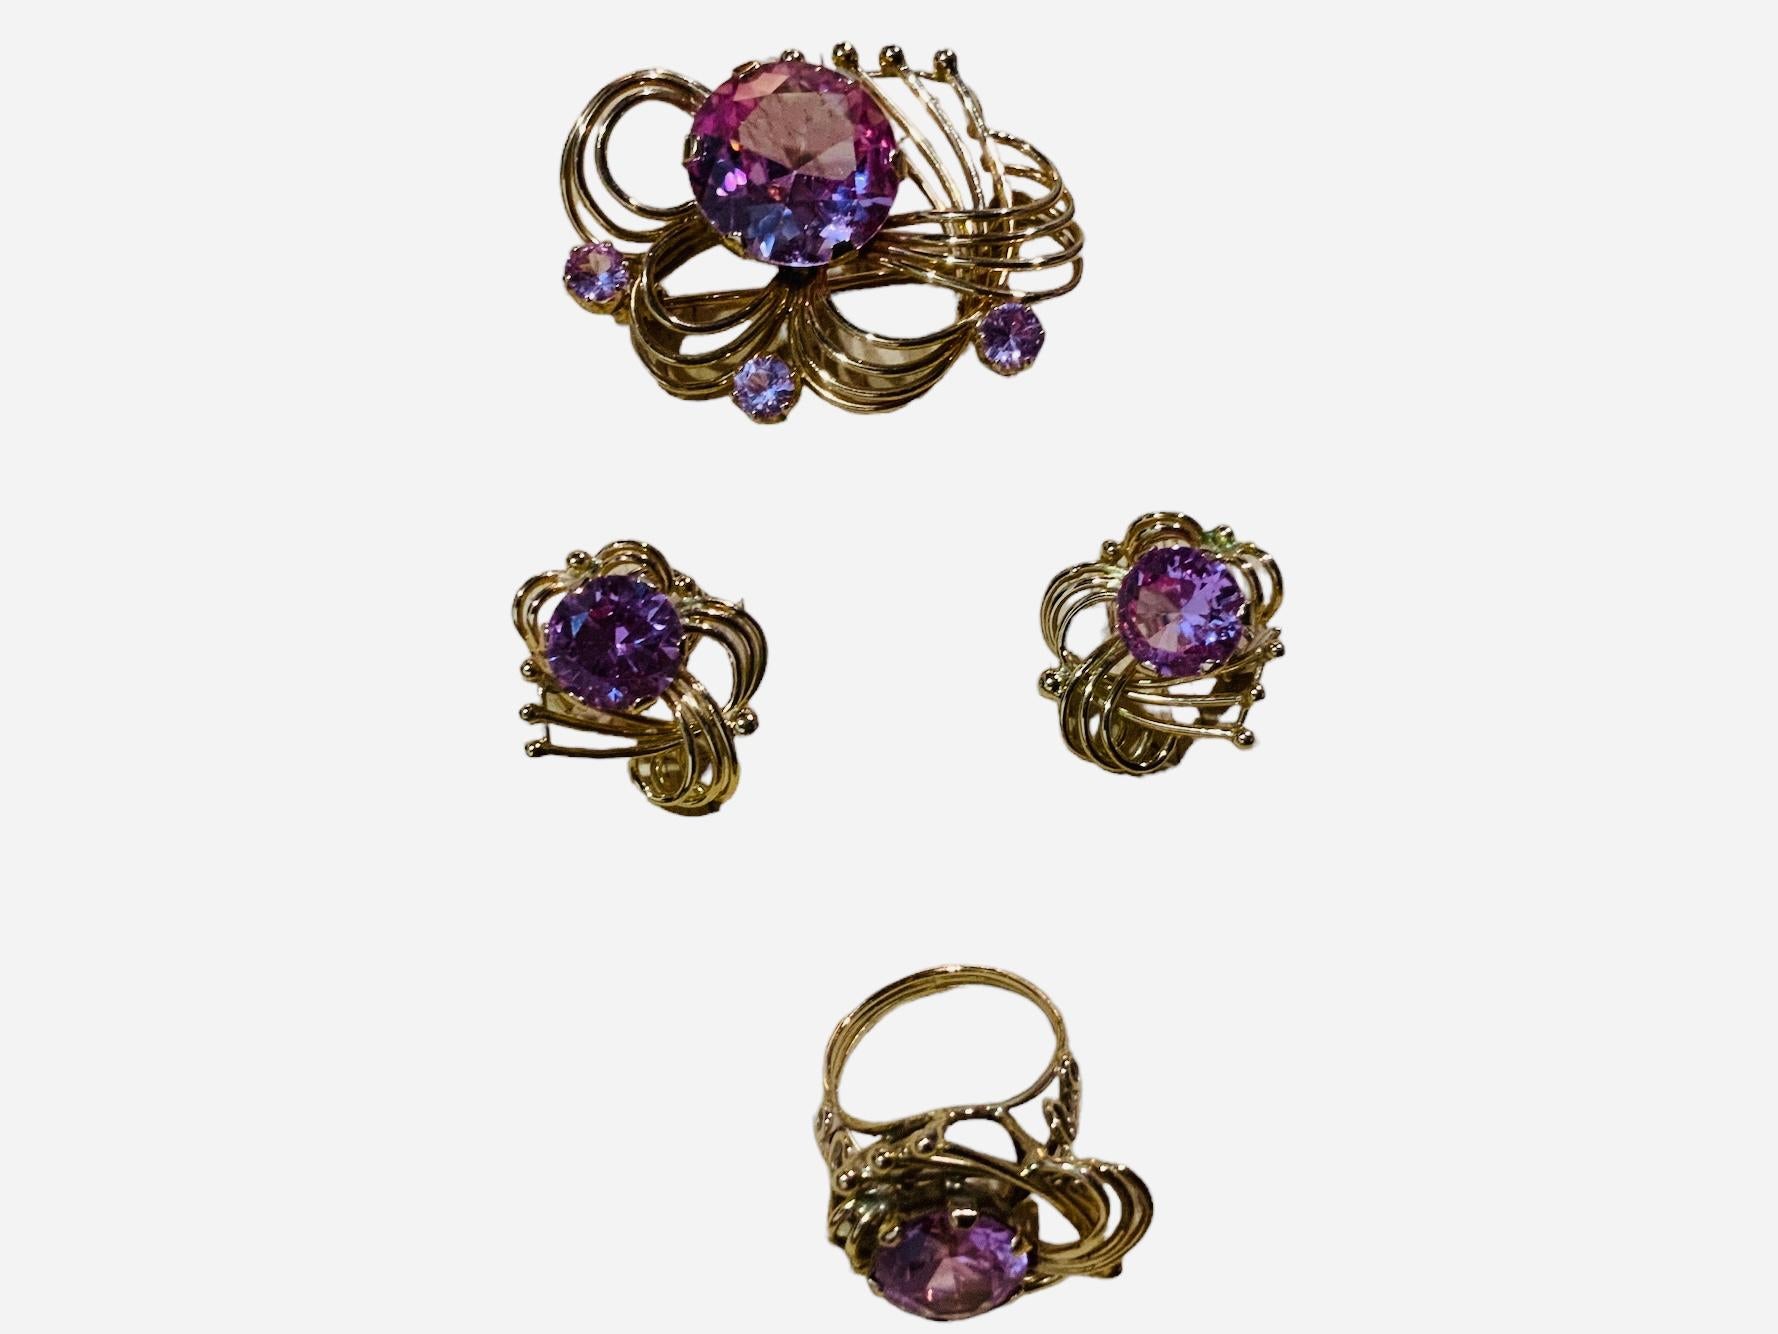 This is a 14K Gold Pink Sapphires Parure. It depicts a yellow gold brooch, pair of earrings and ring that contain seven brilliant shape created Pink Sapphires weighing 40.71 carats. Mount made in 14k yellow gold. Its weight is 34.8 grams. The ring